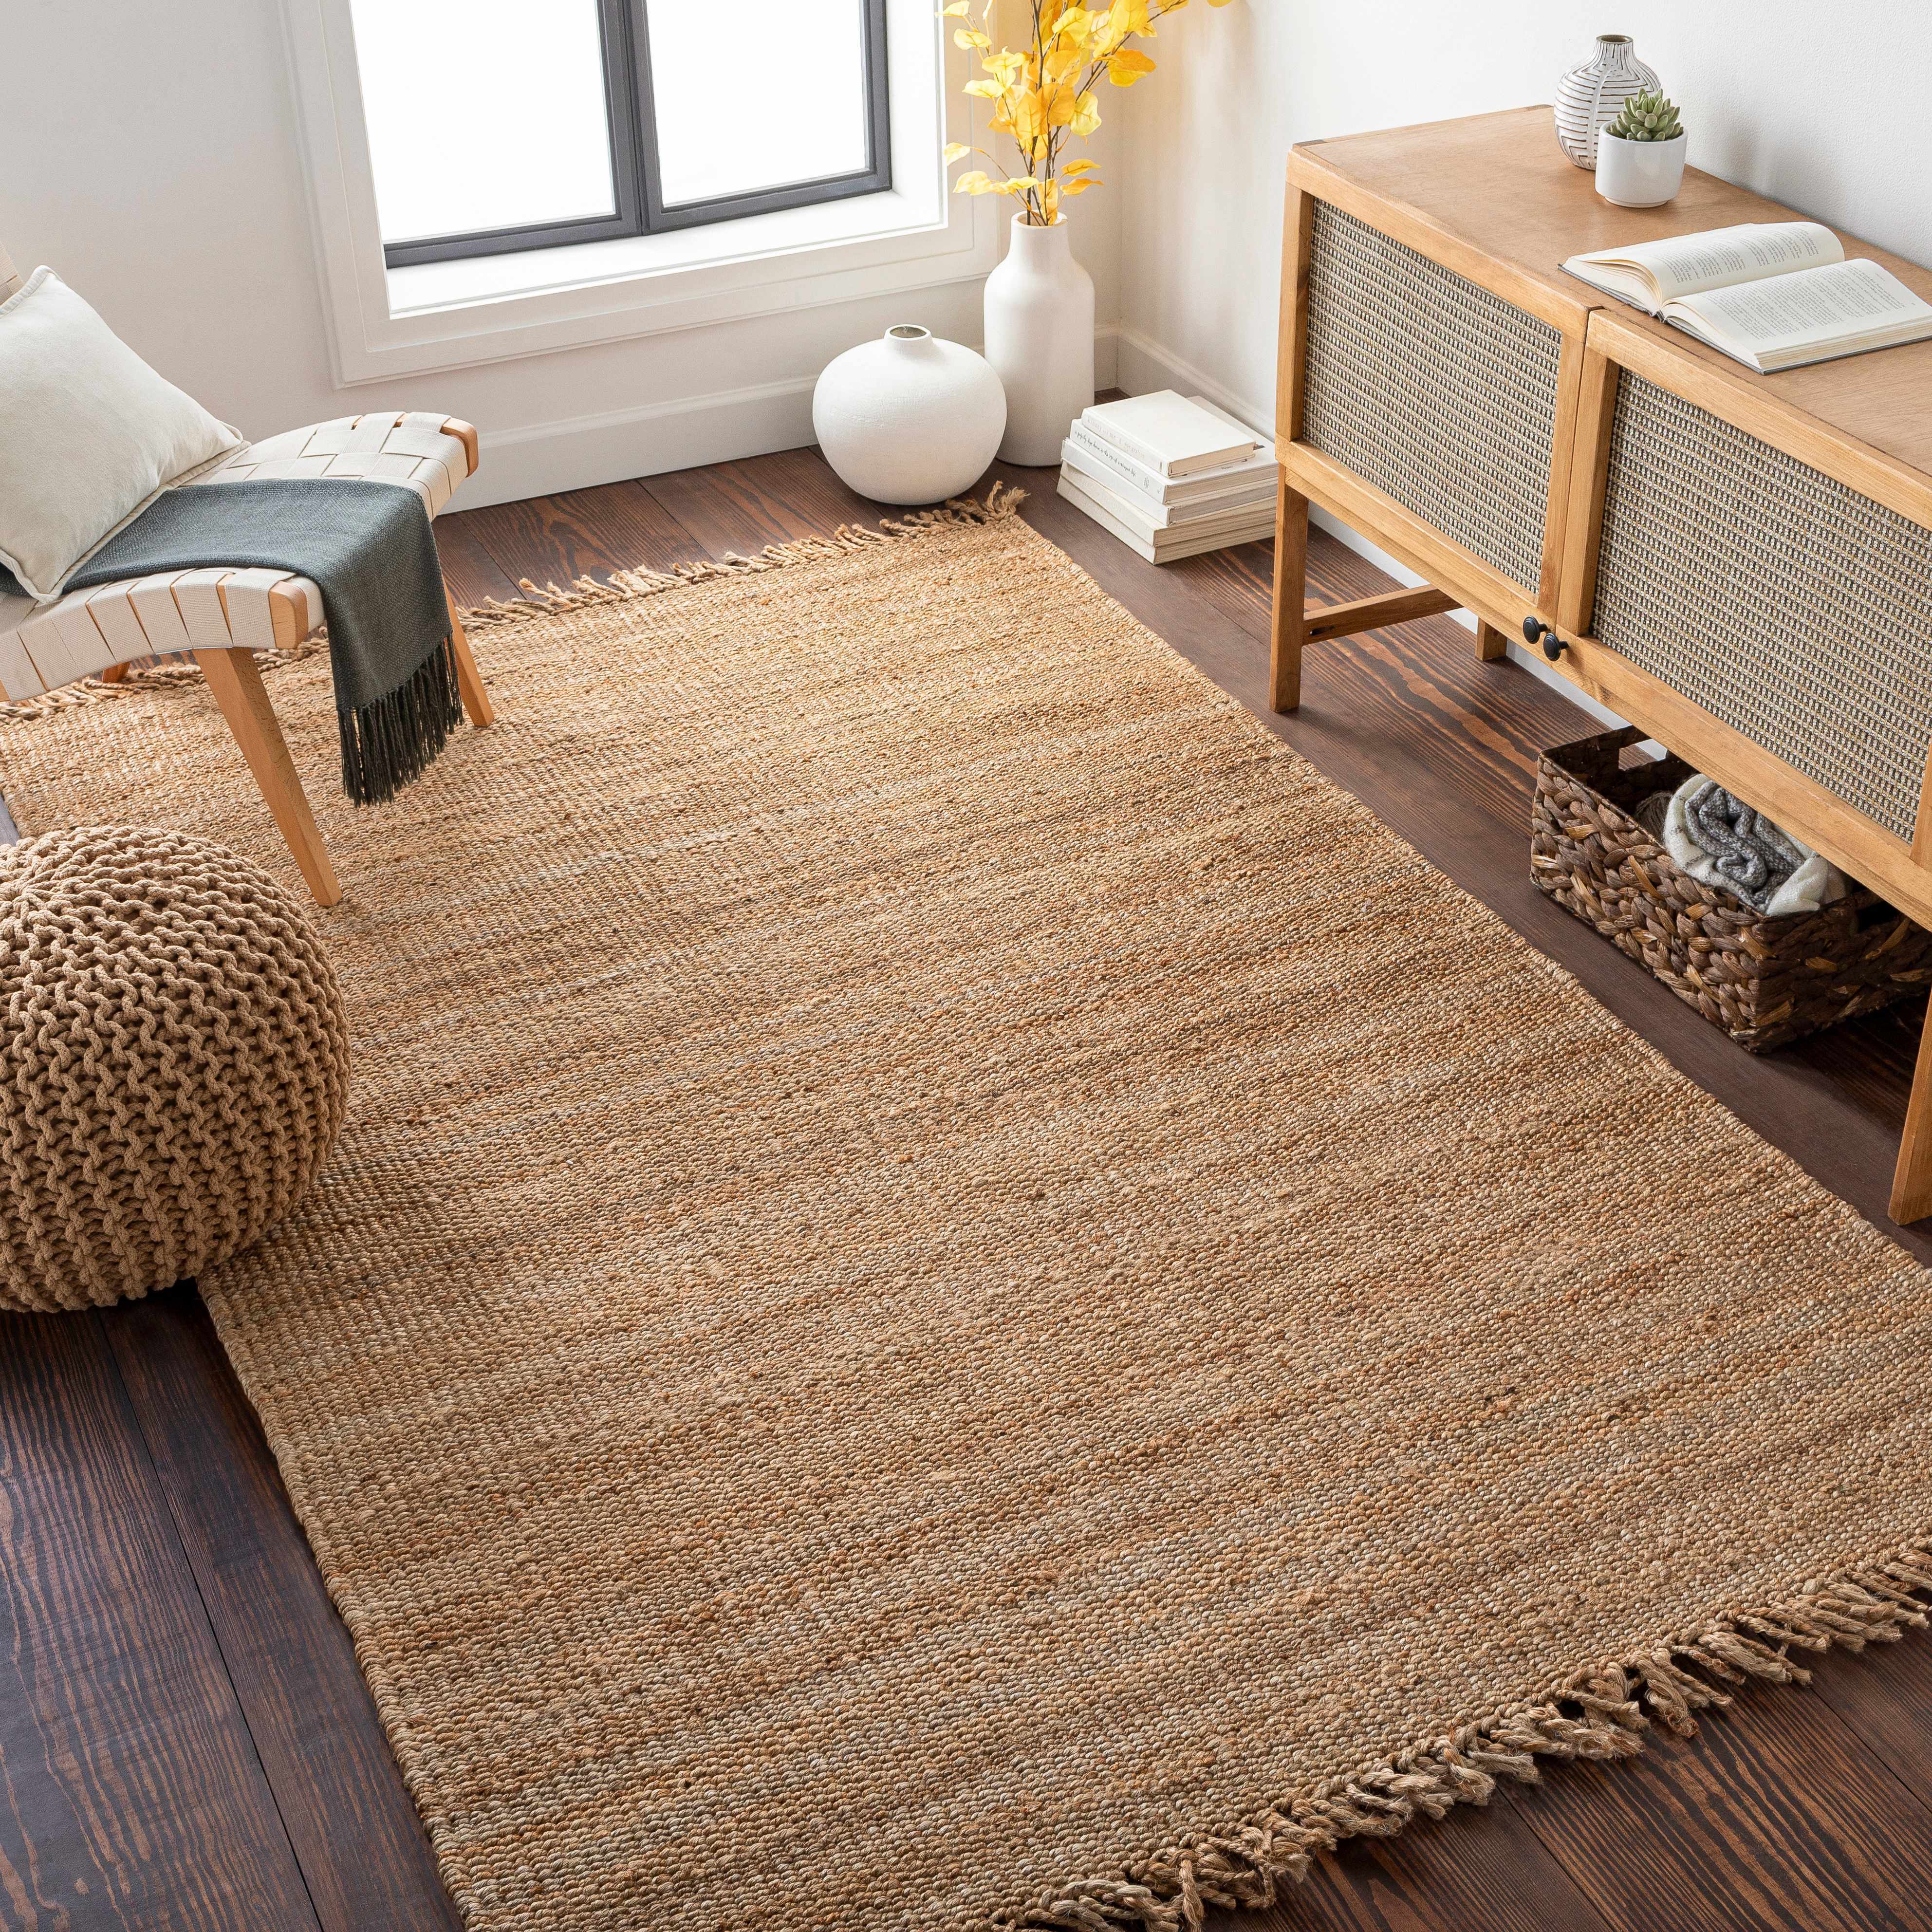 Jute Rugs: What You Should Know About This Problematic Rug